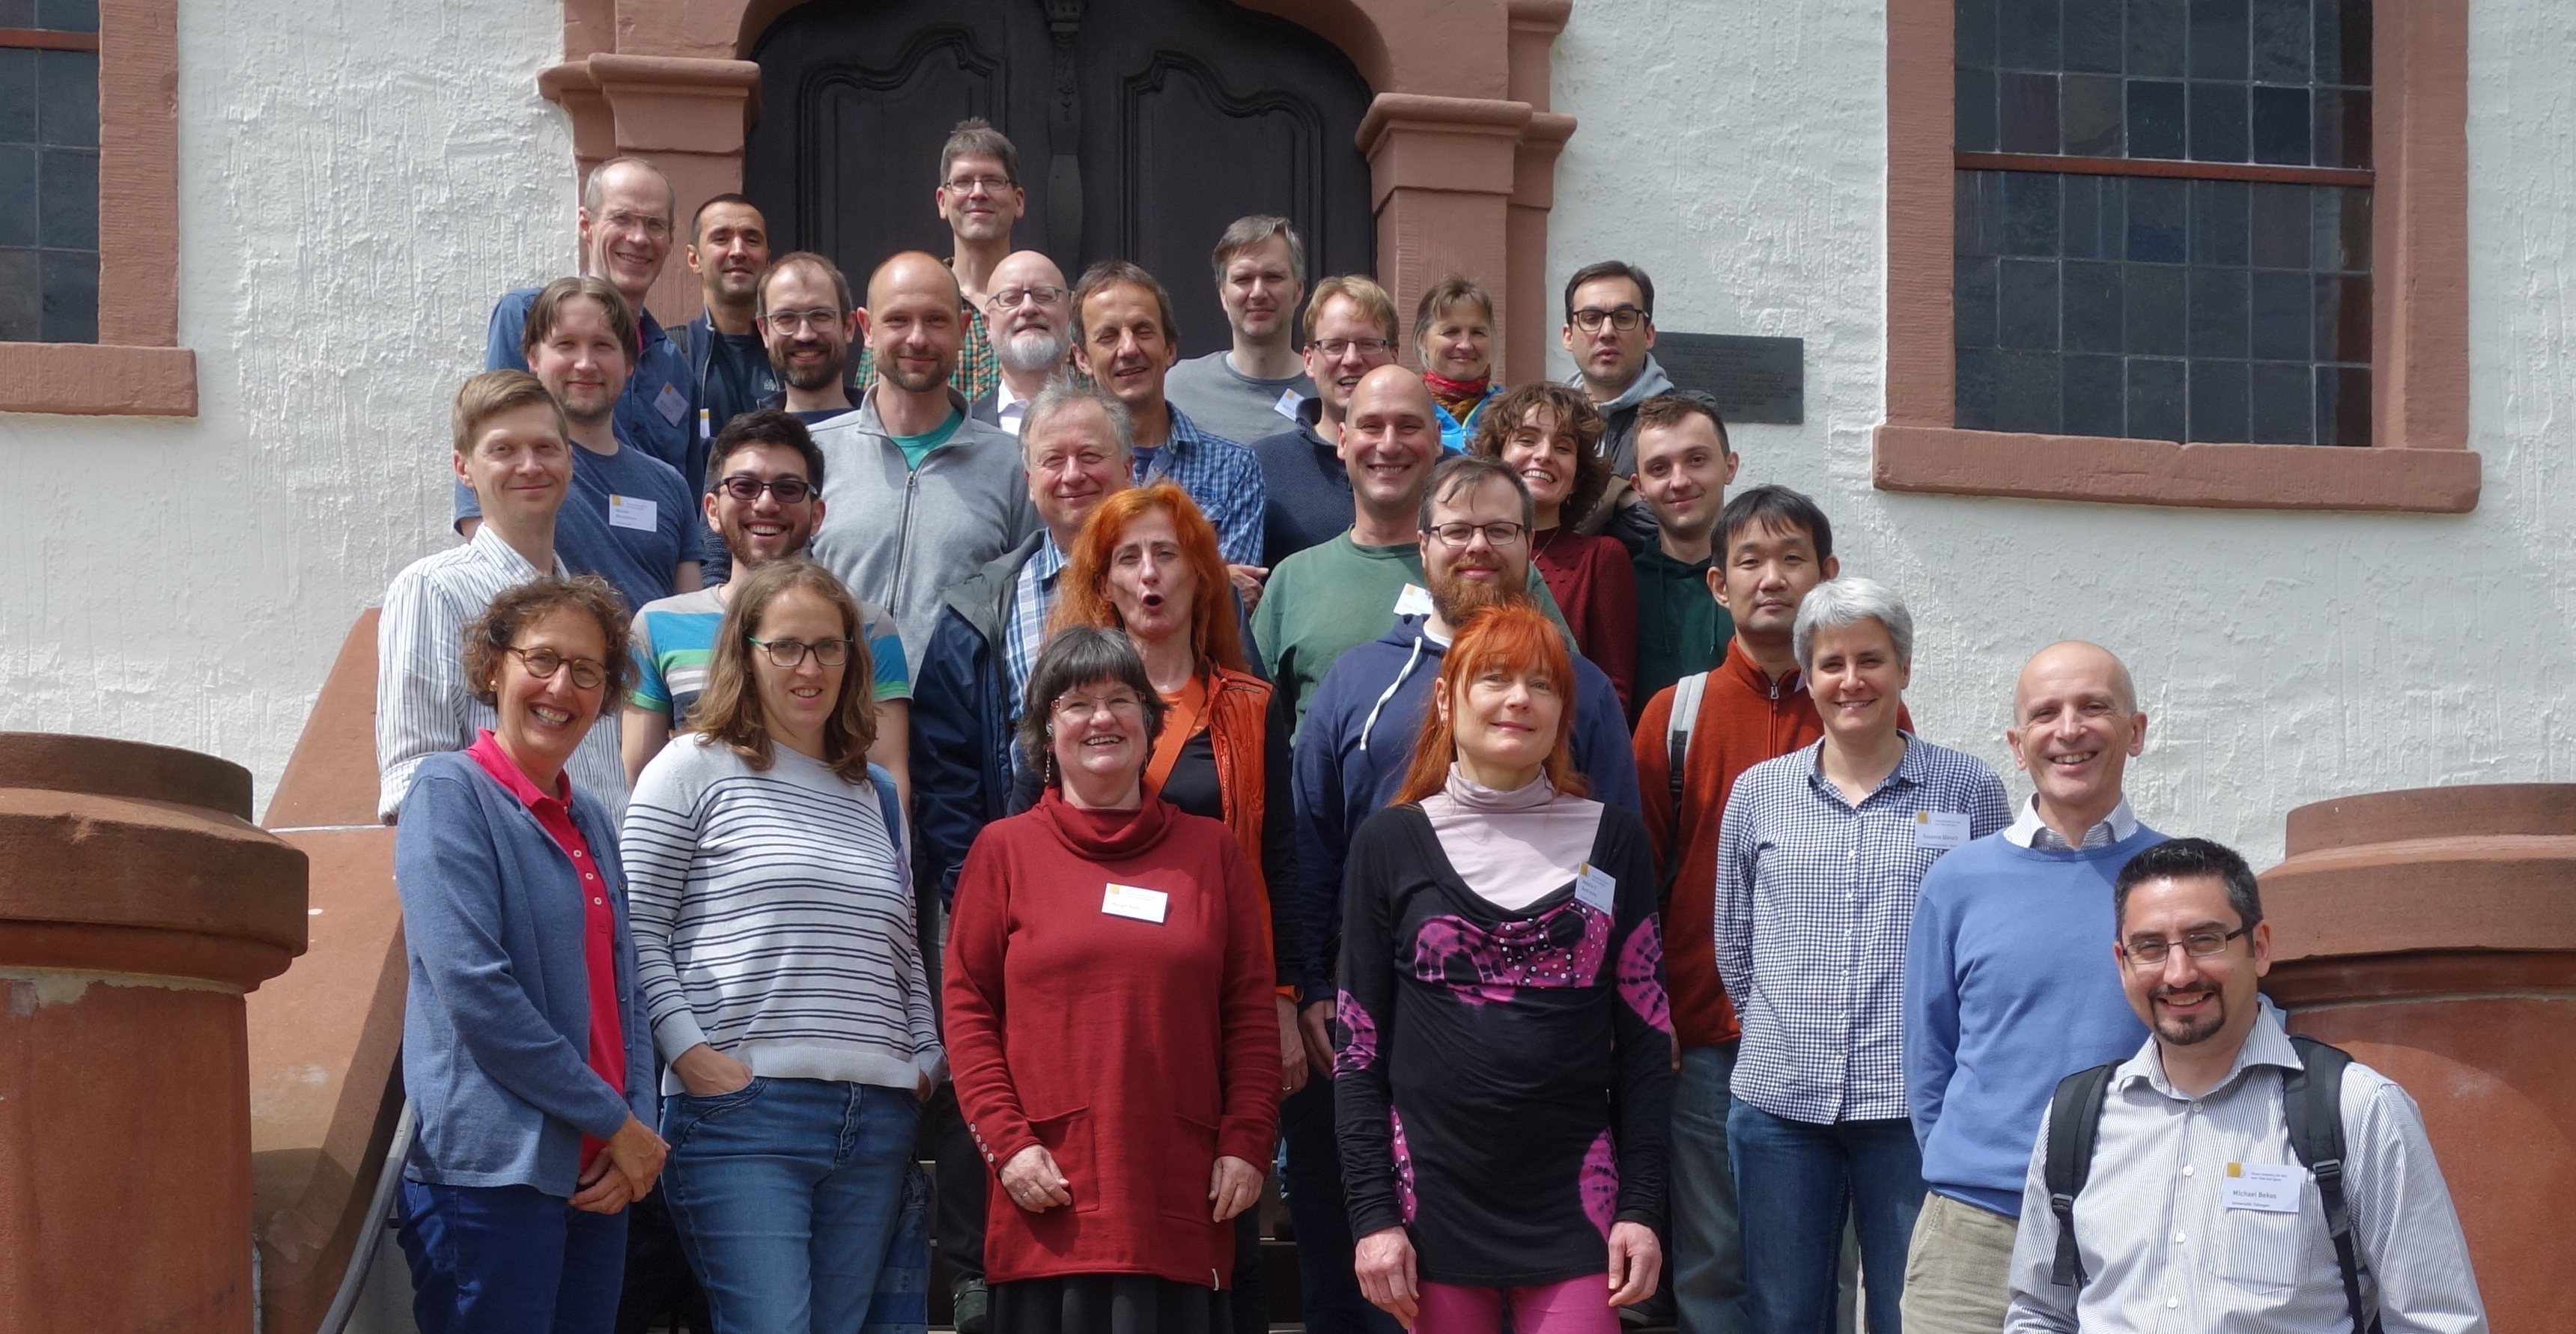 Dagstuhl-Seminar on Visual Analytics for Sets over Time and Space